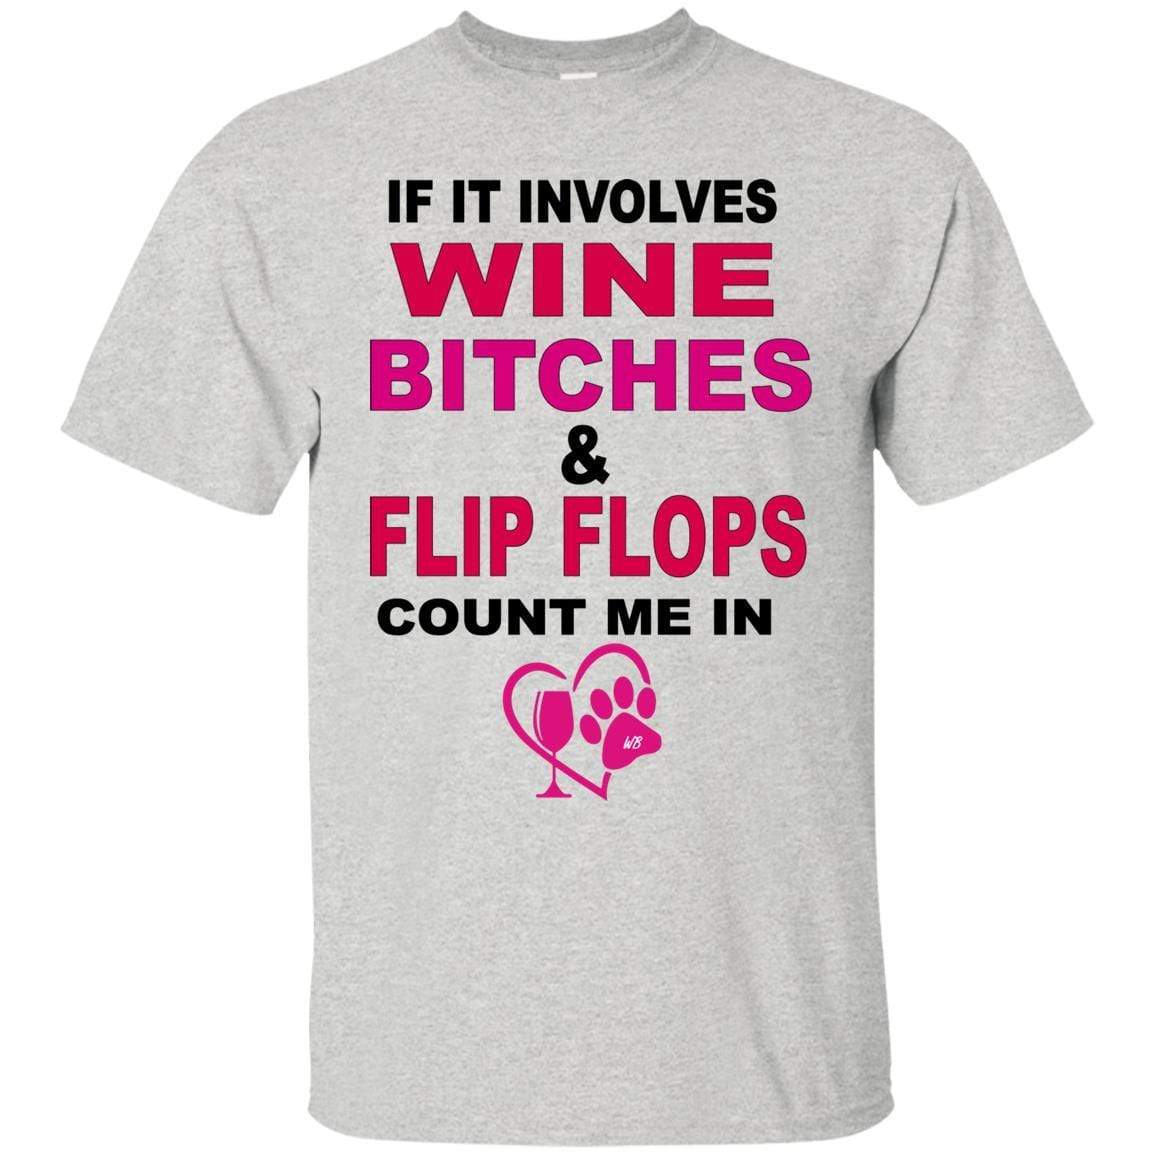 T-Shirts Ash / S WineyBitches.co " If It Involves Wine Bitches & Flip Flops I'm In" Ultra Cotton Unisex T-Shirt WineyBitches.co Hilariously Funny T-Shirt for Wine & Dog Lovers   WineyBitchesCo